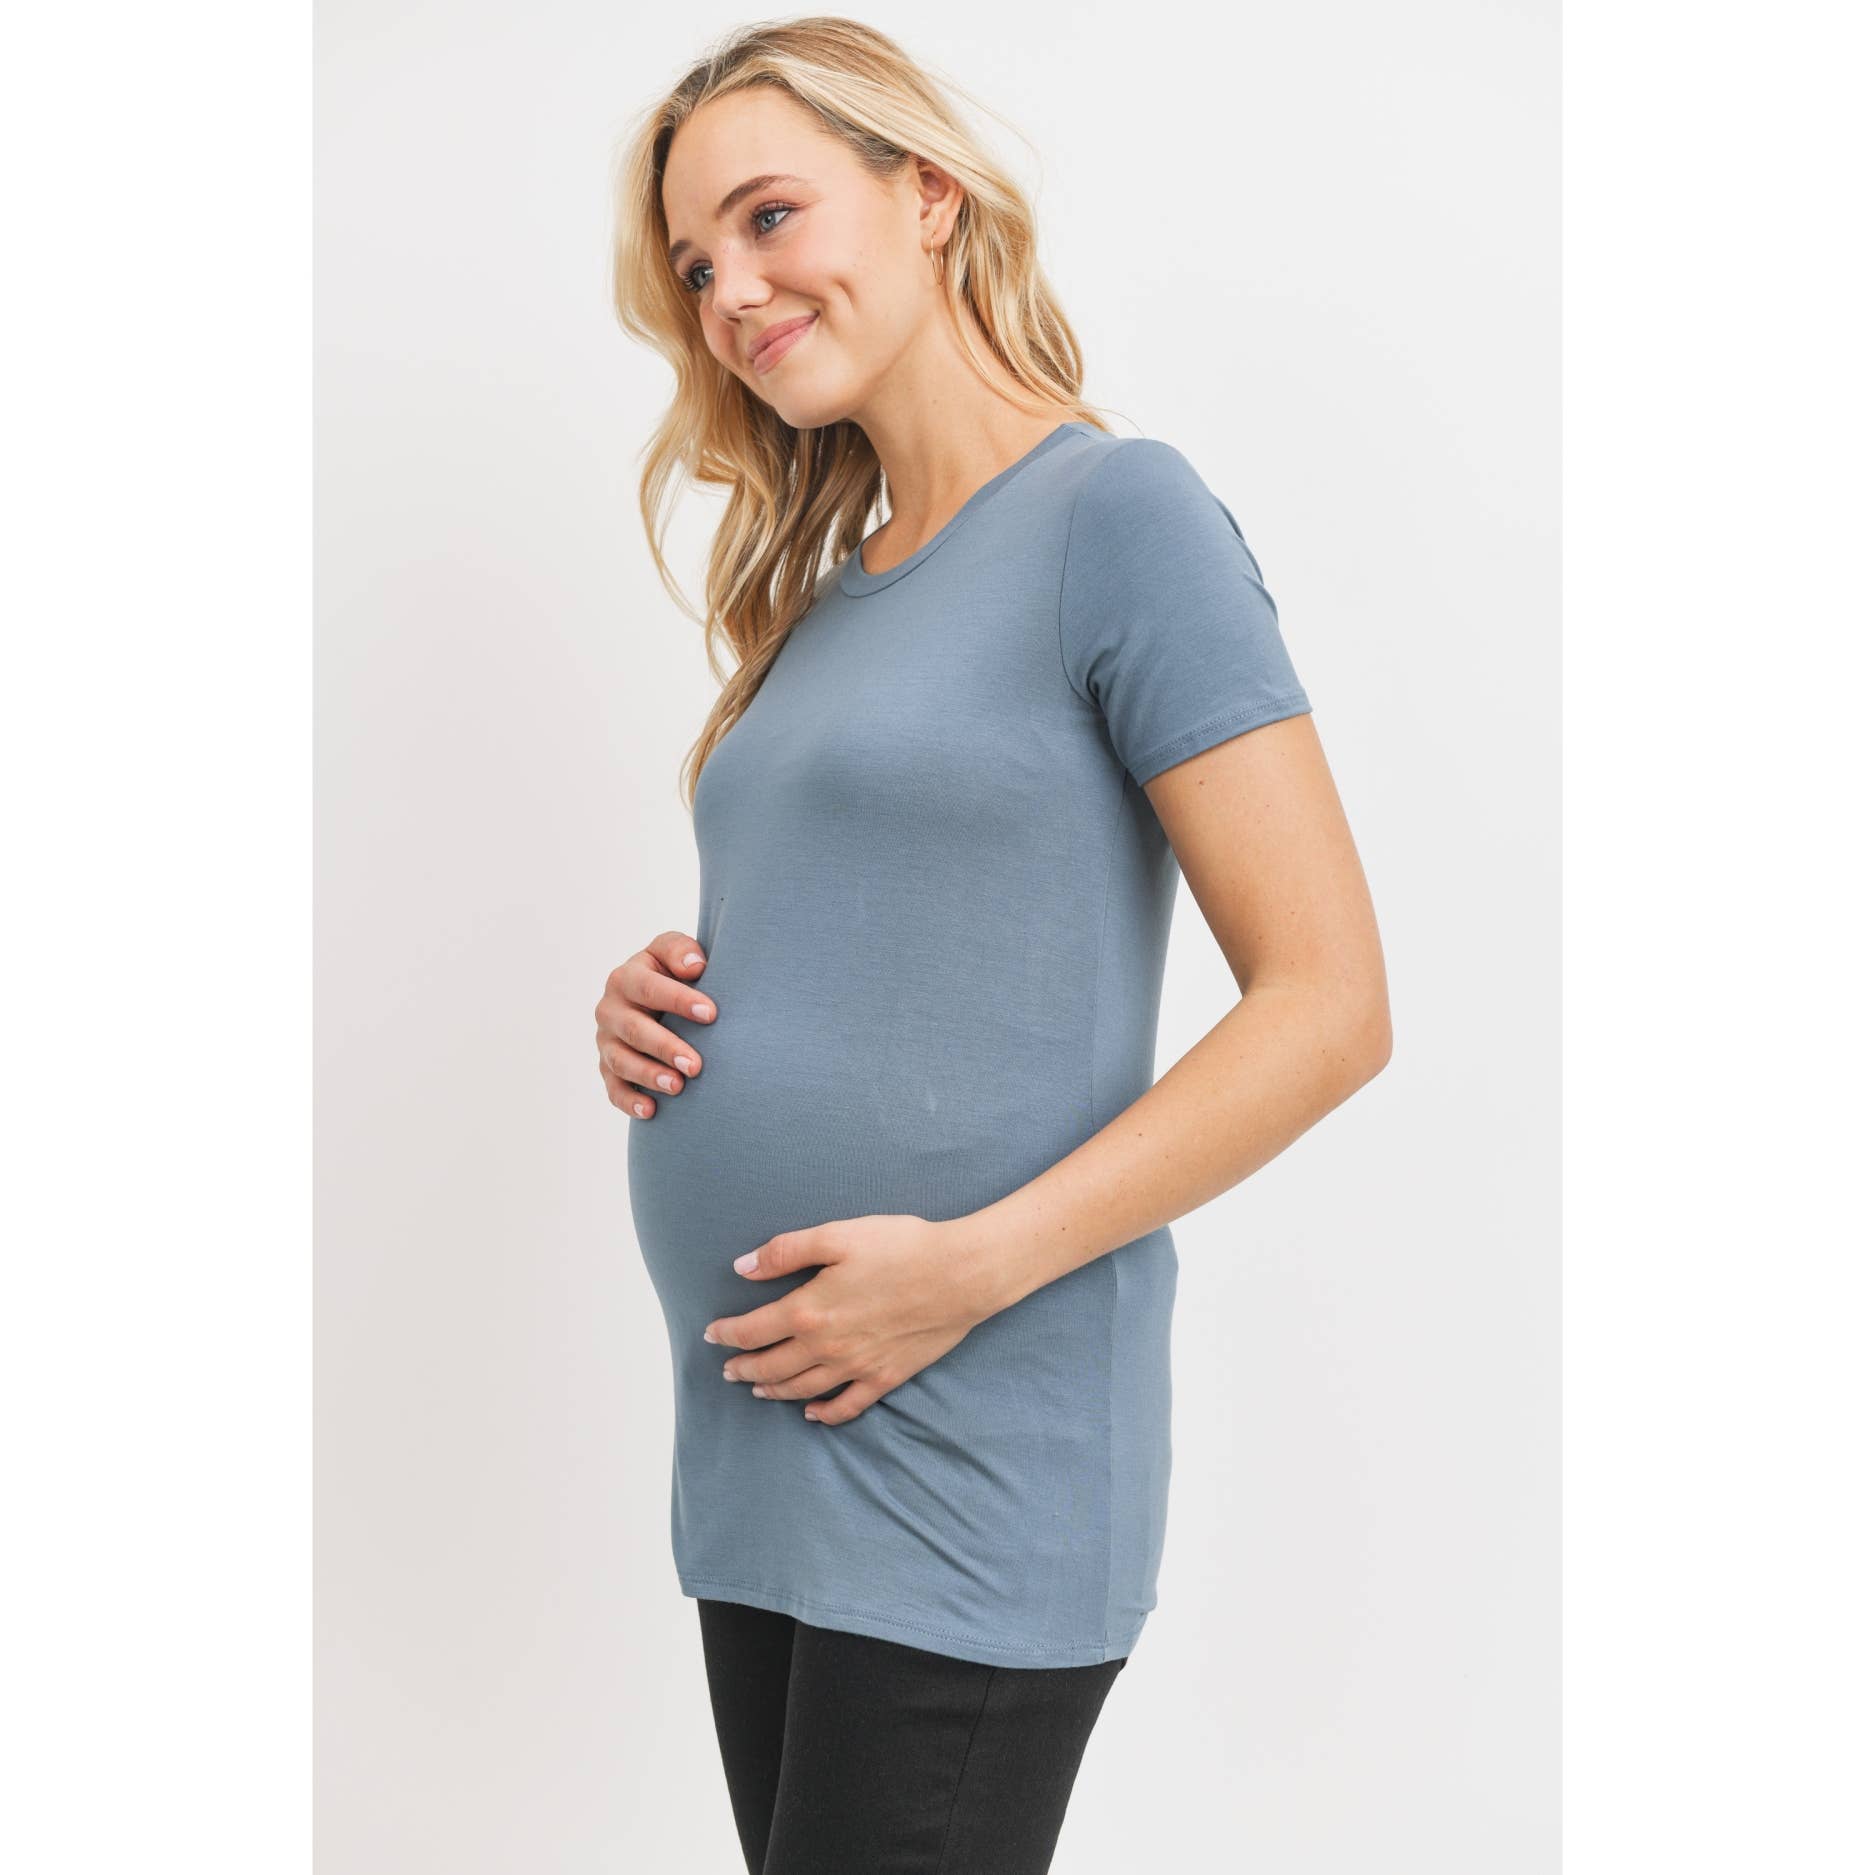 Kindred Bravely Solid Gray Shorts Size L (Maternity) - 40% off